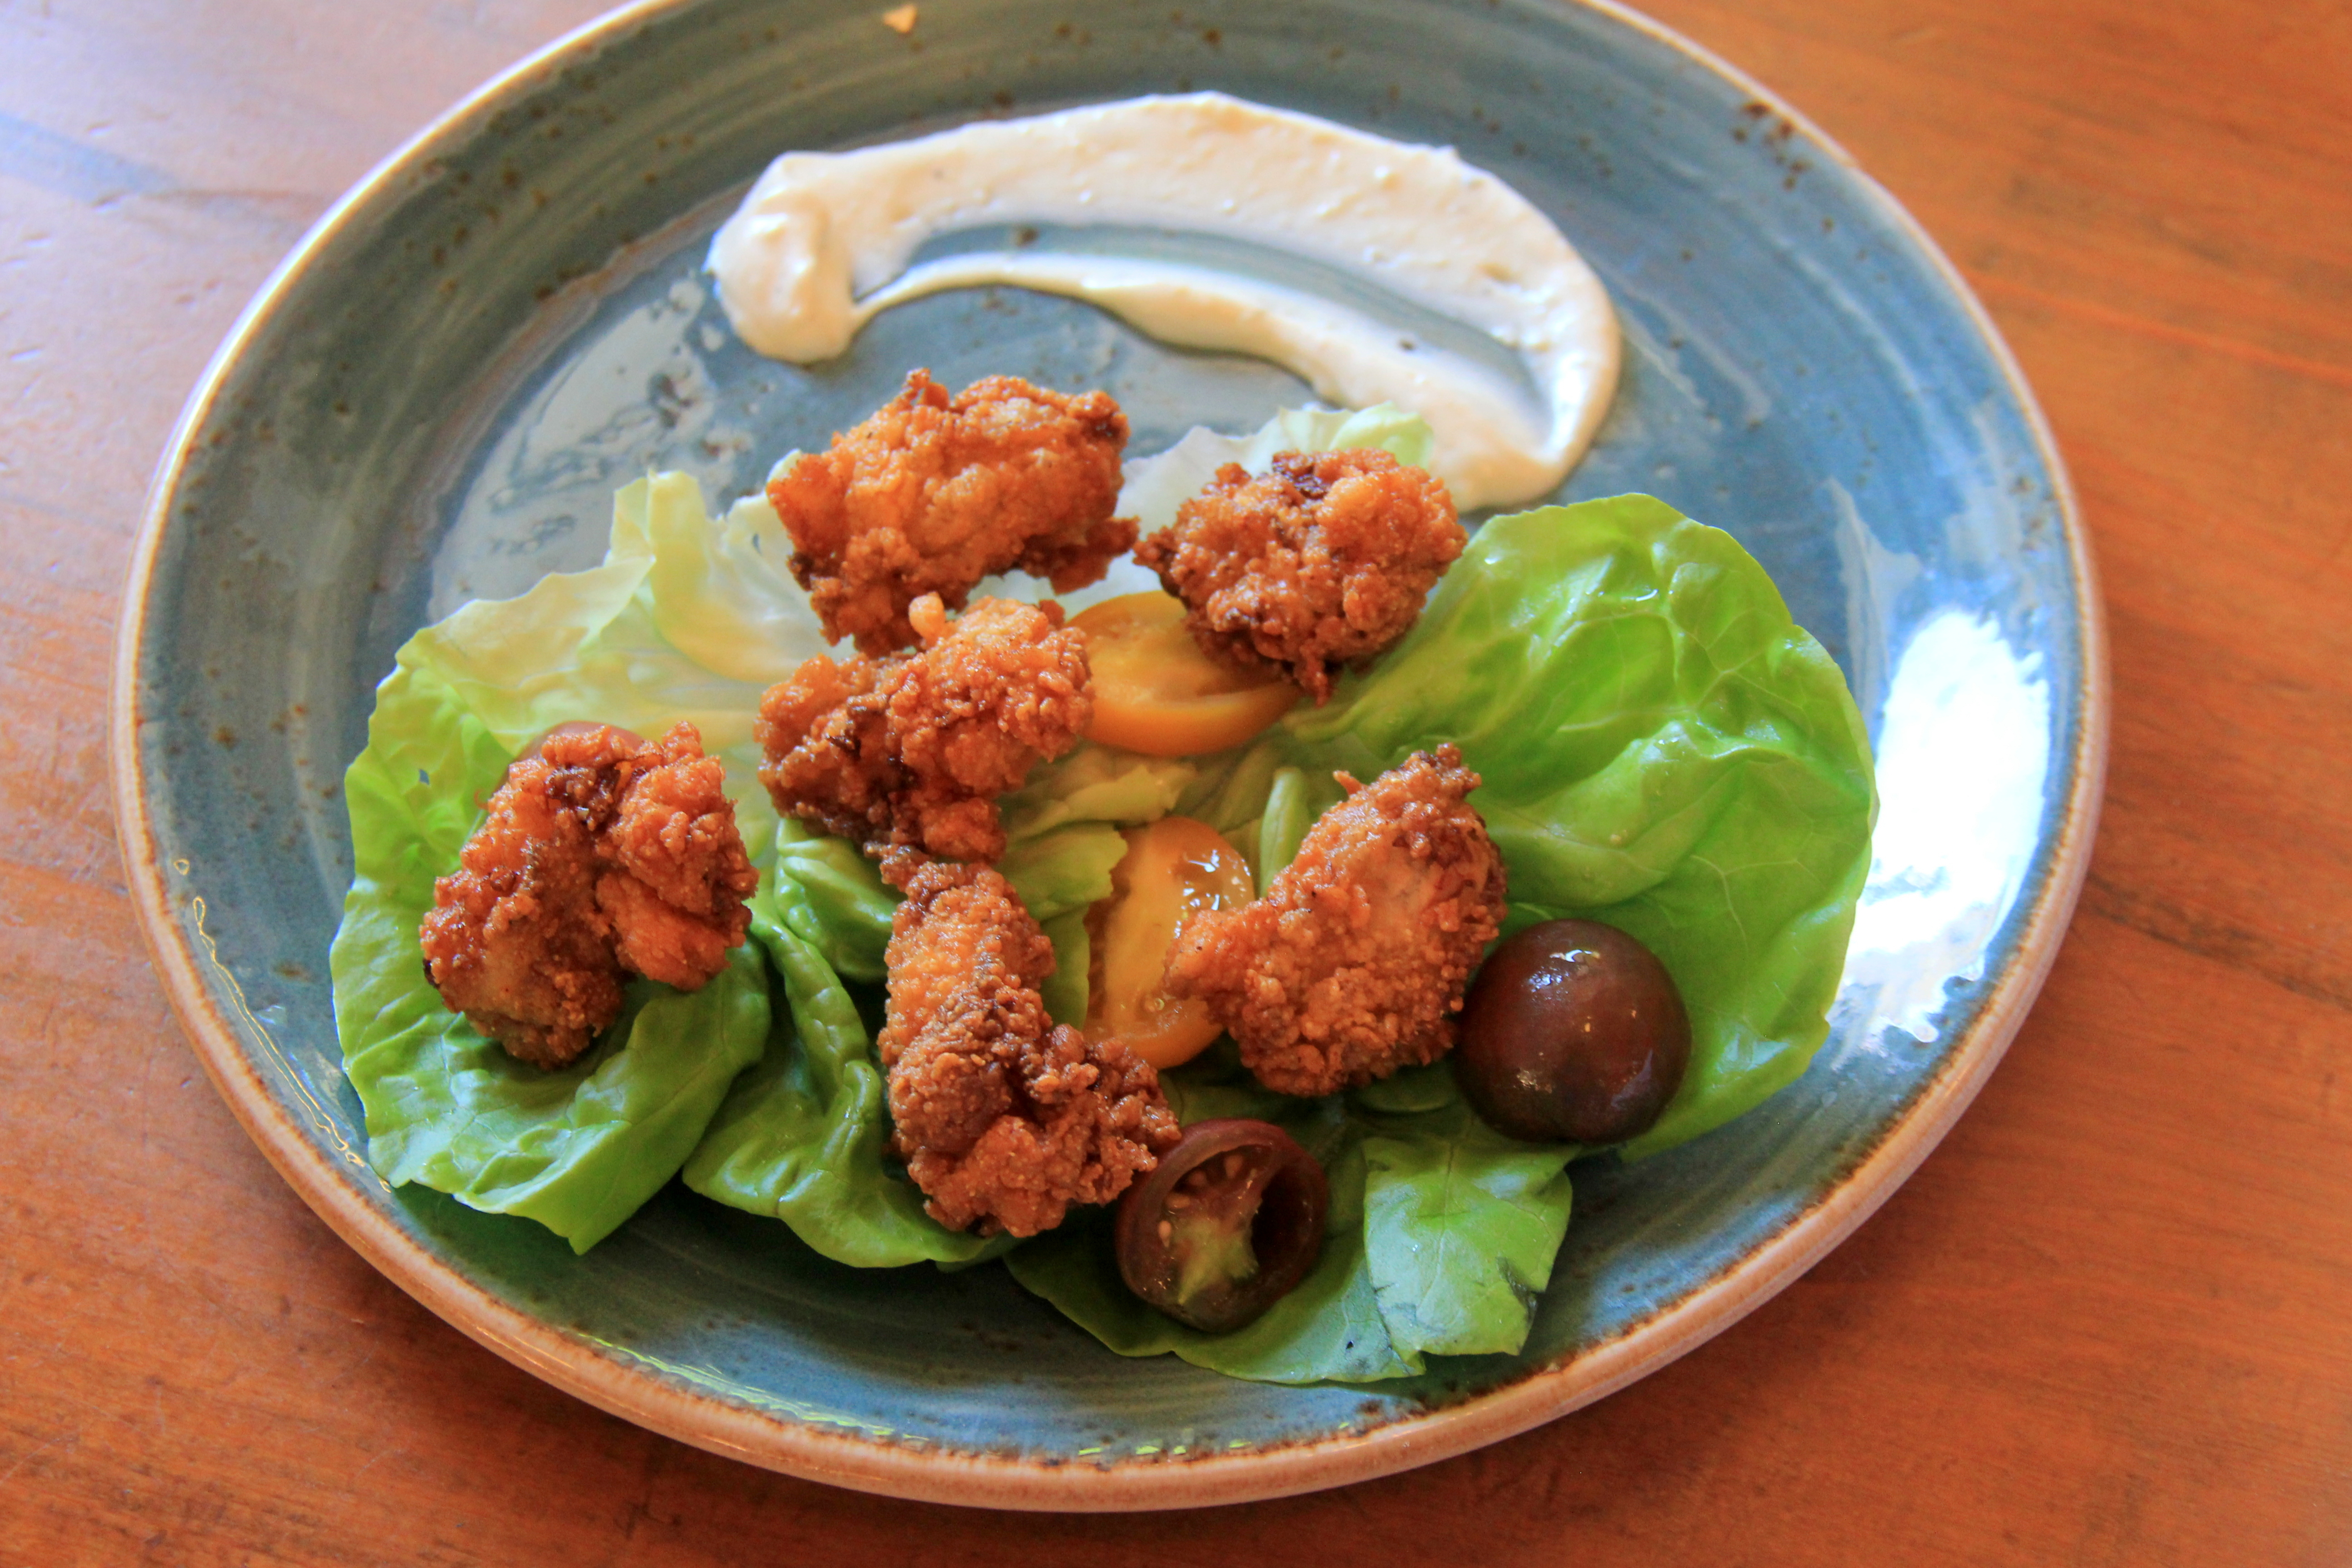 Grand Isle Restaurant-Smoked Fried Oysters 